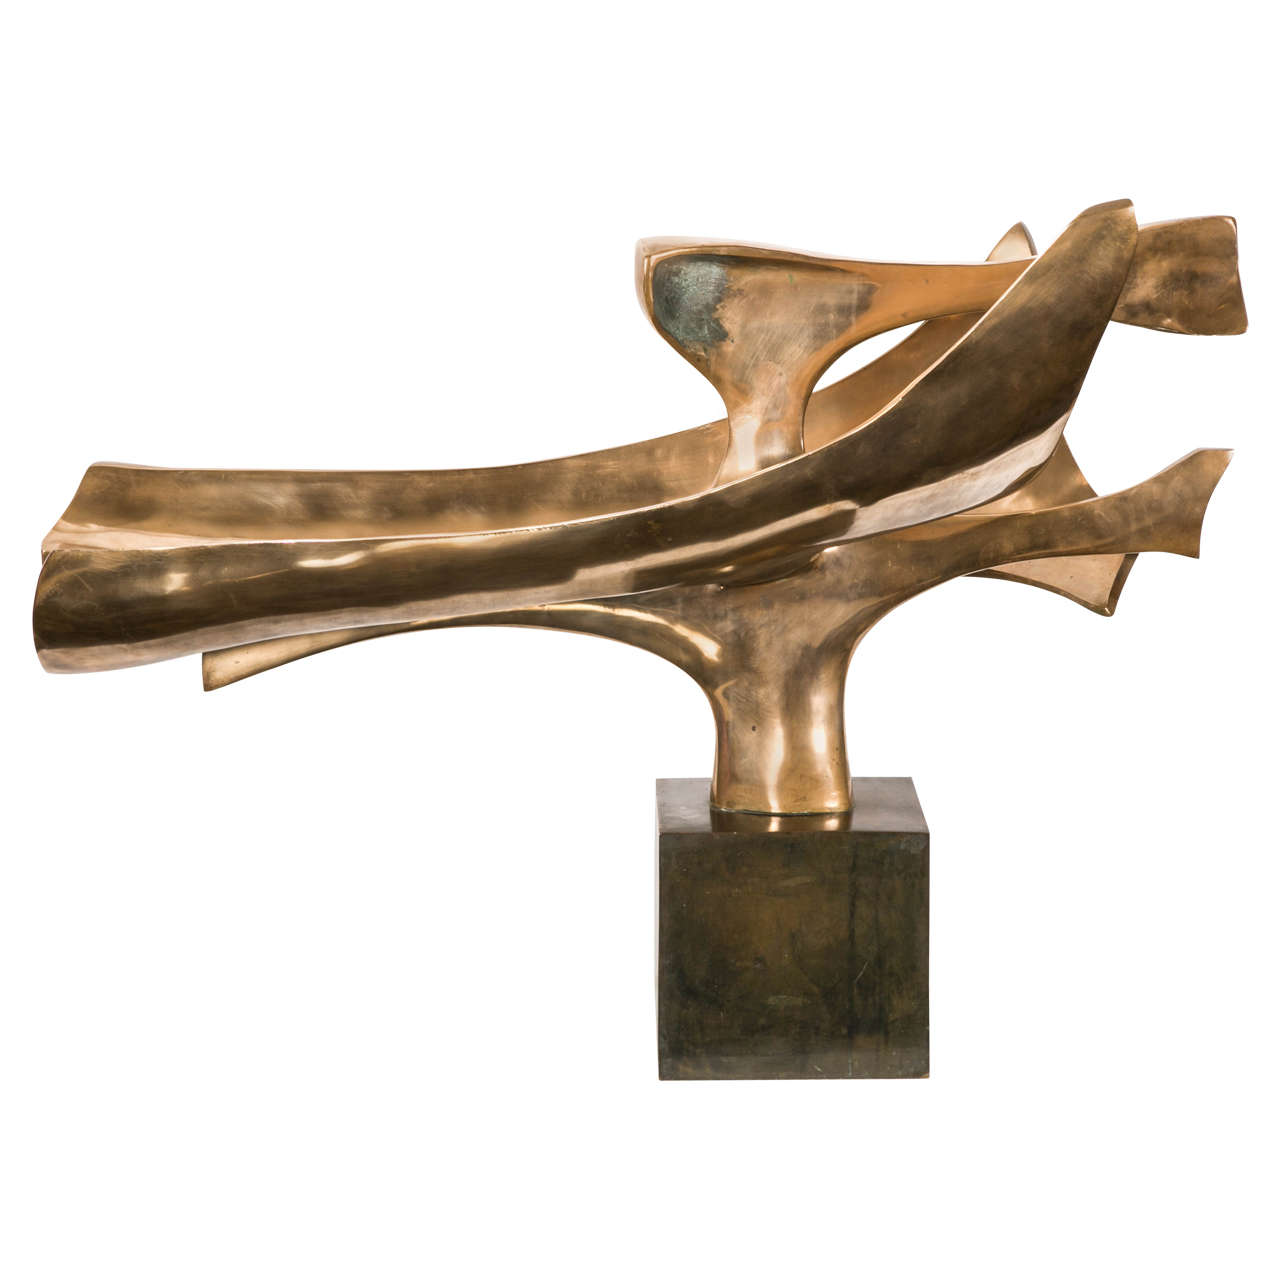 Important gilt polished bronze sculpture, by Fred Brouard, circa 1980.
Cubic brown patinated bronze base. One special small upper part with oxidized patina.
Signed and numbered 1/8.
Base height 21 cm.
 
Fred Brouard (1944-1999), met Alicia